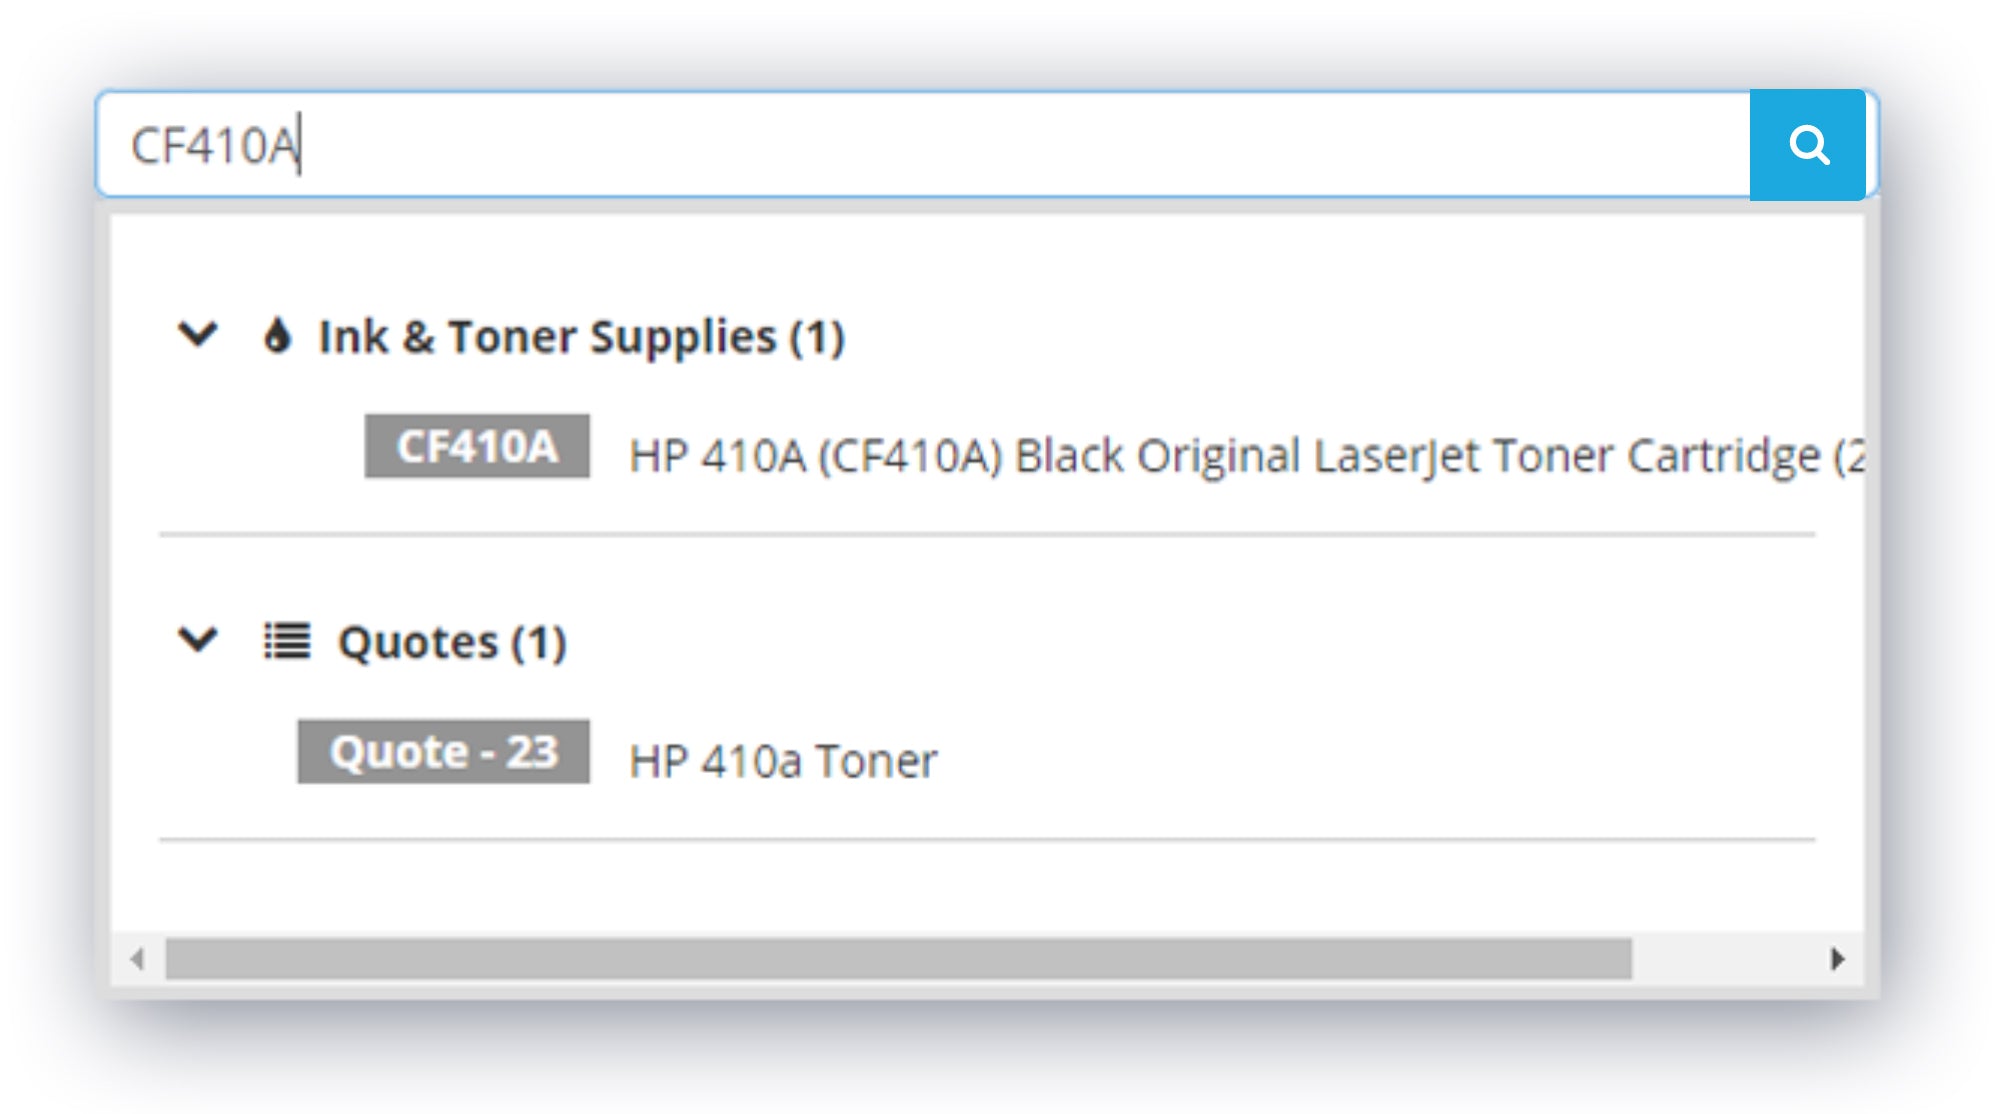 A screen capture example of the search functionality for quotes of printer ink and toner available on the Fusion Managed Services website.